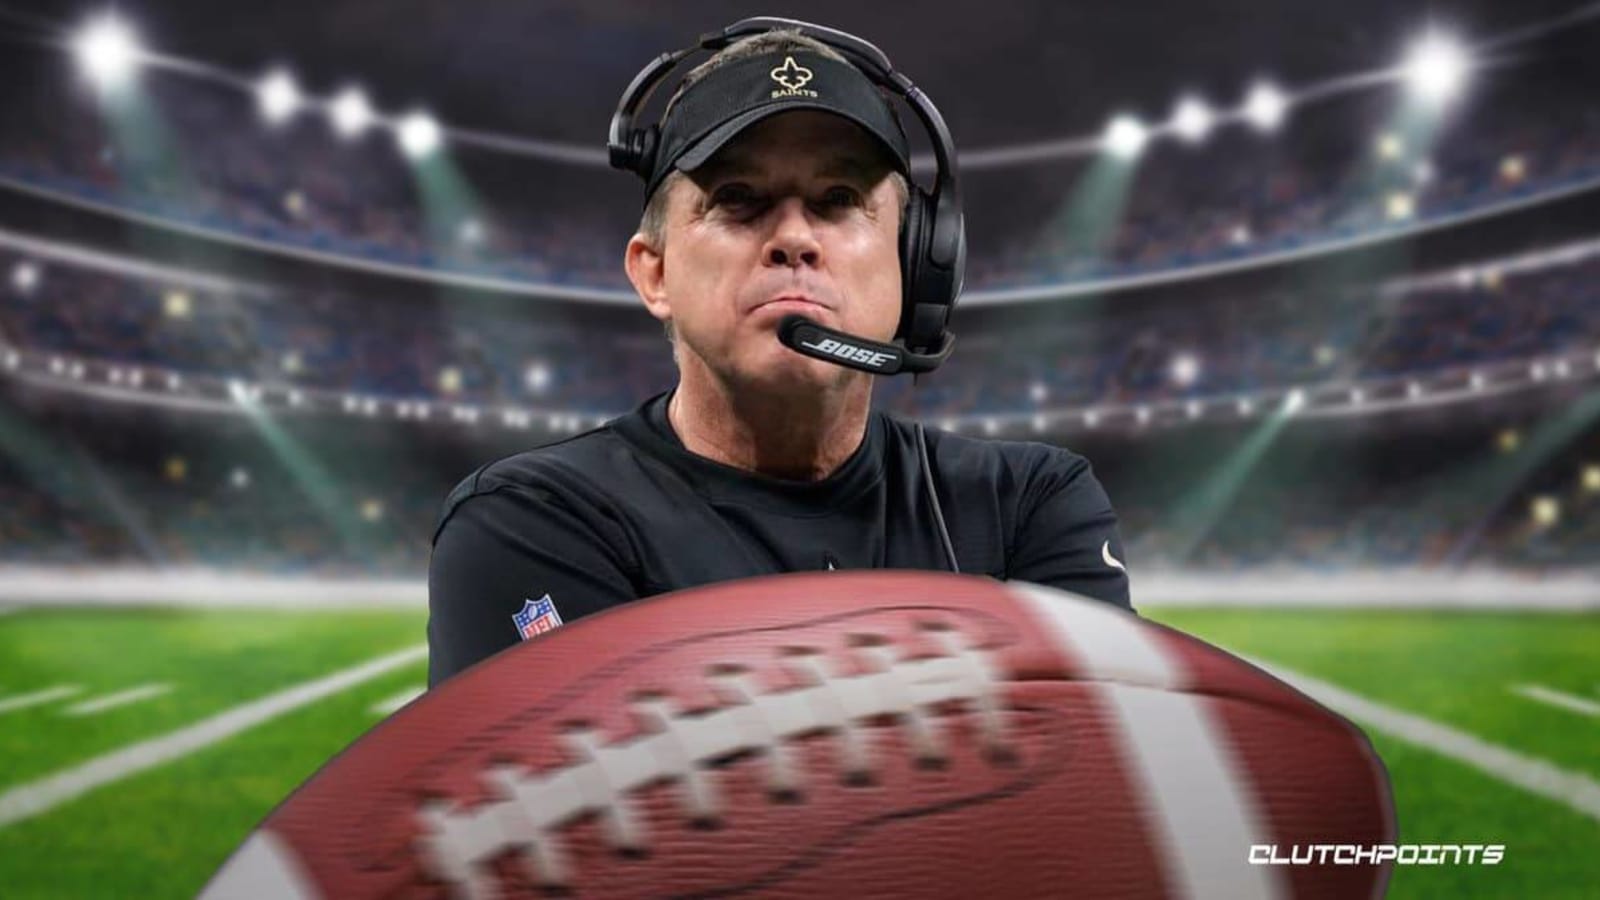 Sean Payton reveals what a team needs to drag him back to NFL